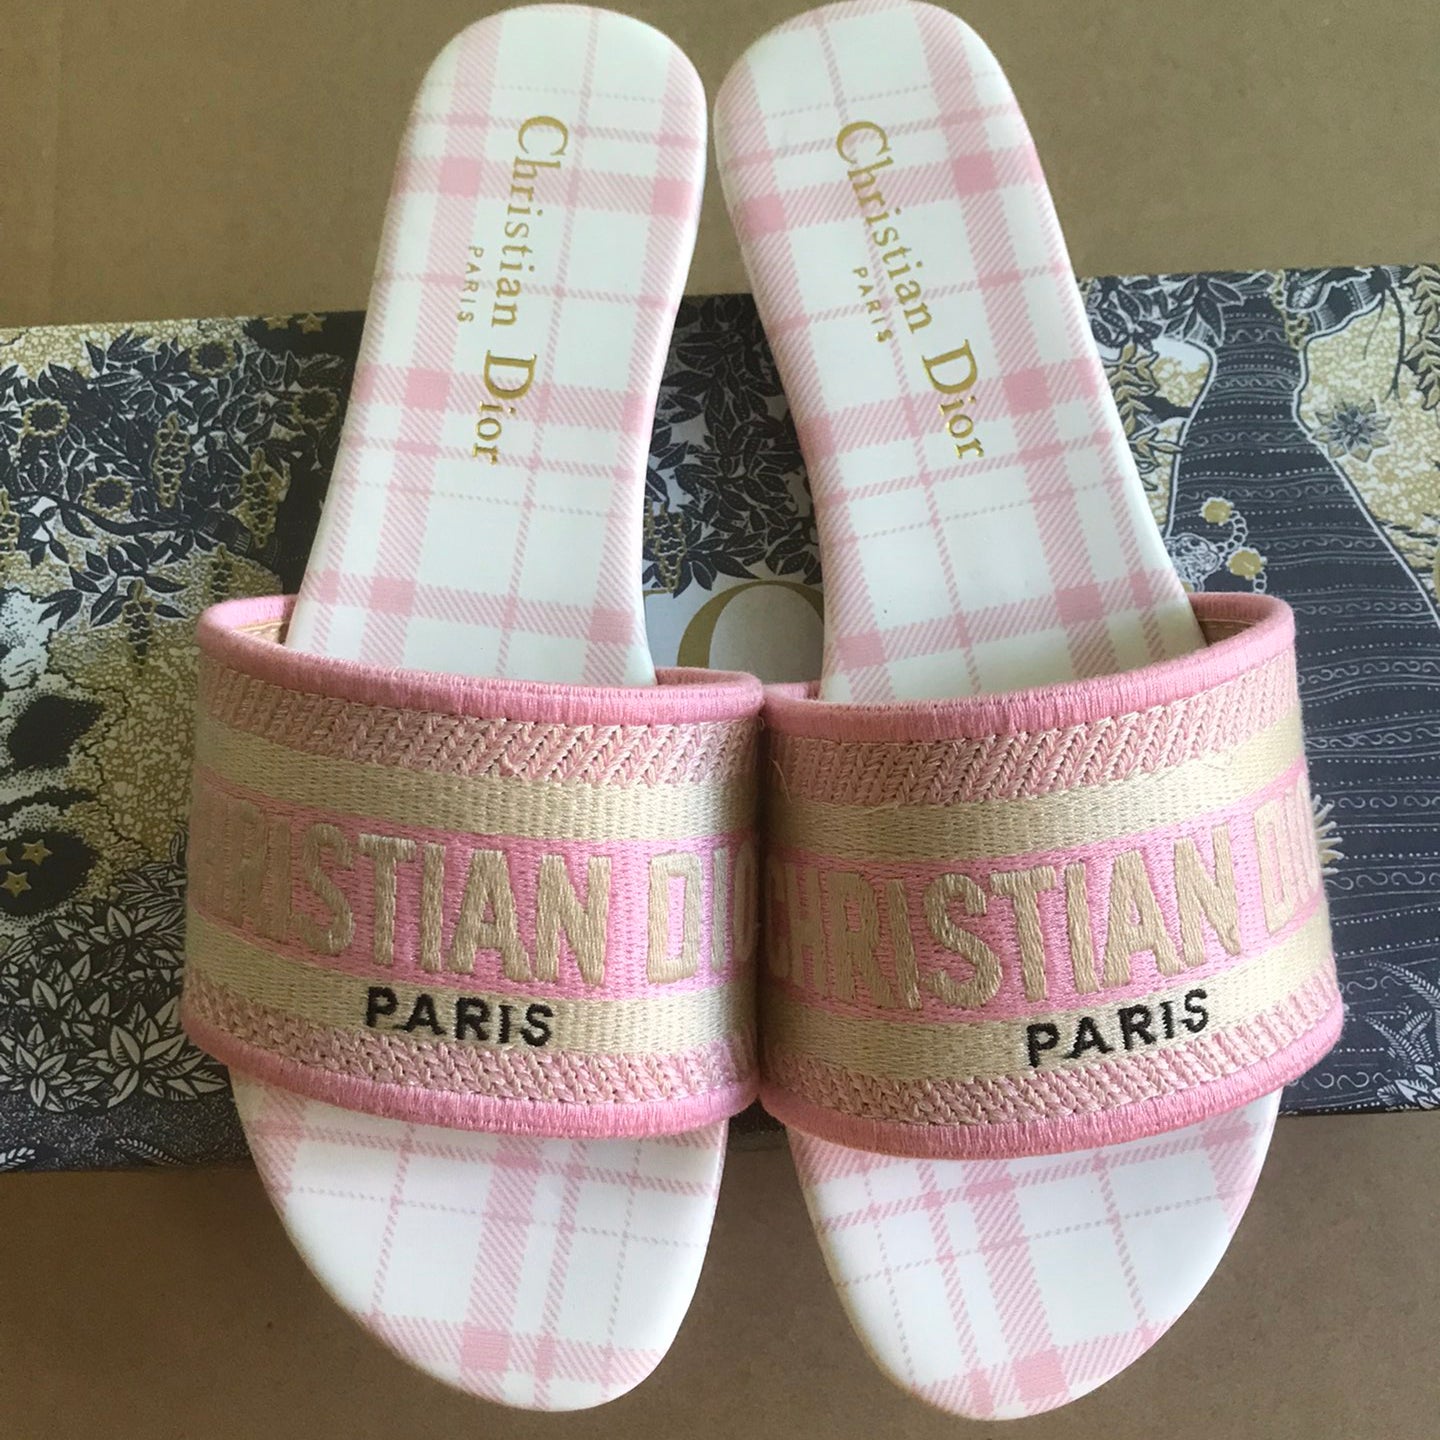 Dior women's slippers with embroidered letters shoes